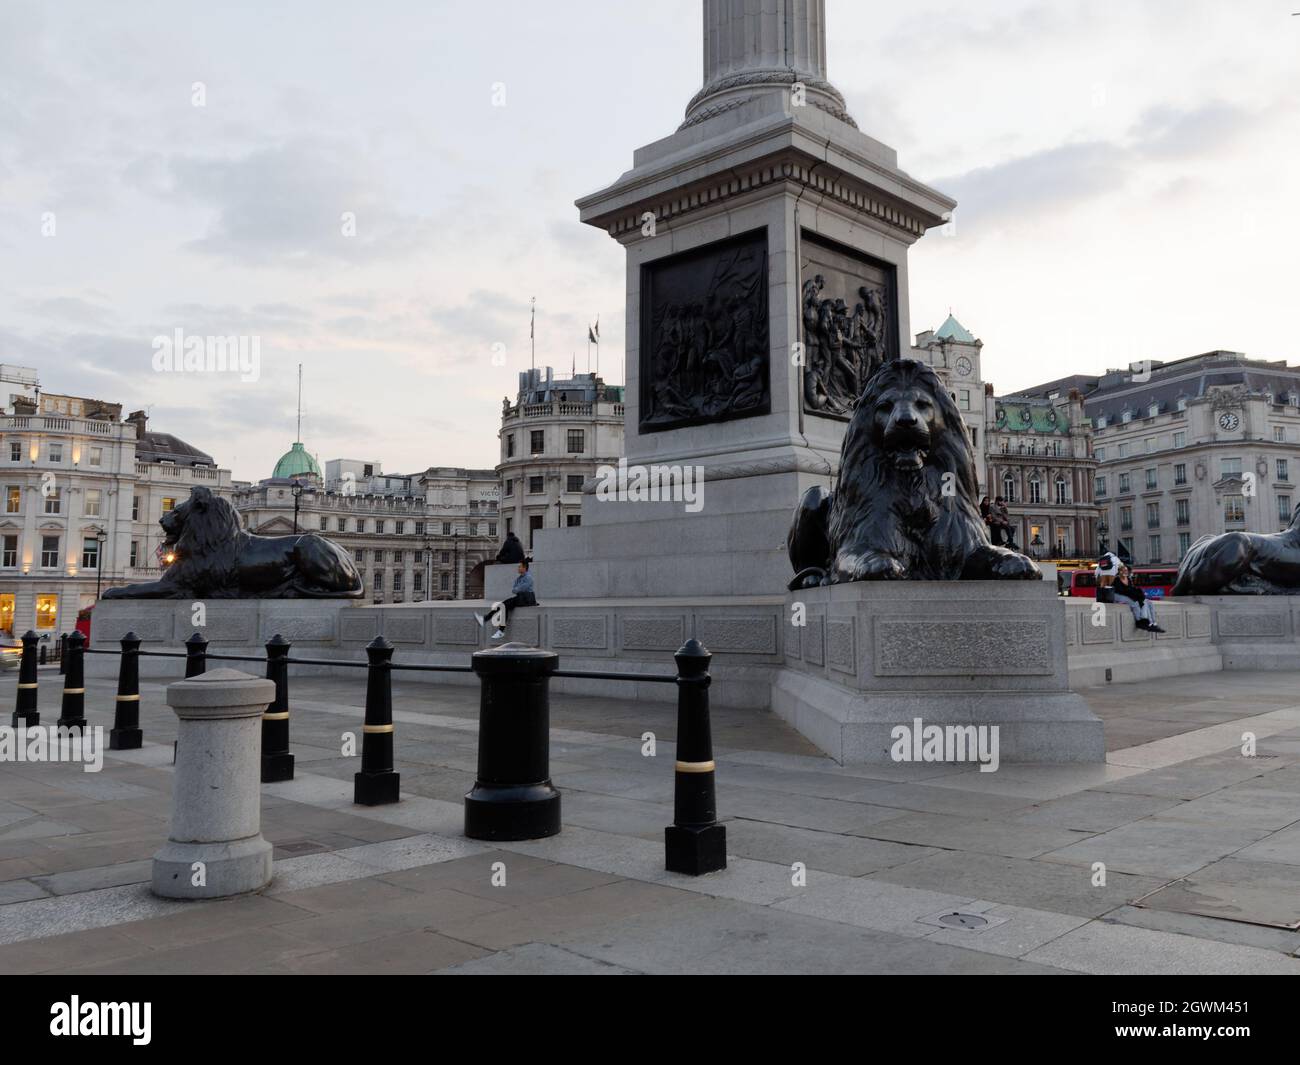 London, Greater London, England, September 21 2021: Lion statues at the foot of Nelsons Column in Trafalgar Square. Stock Photo